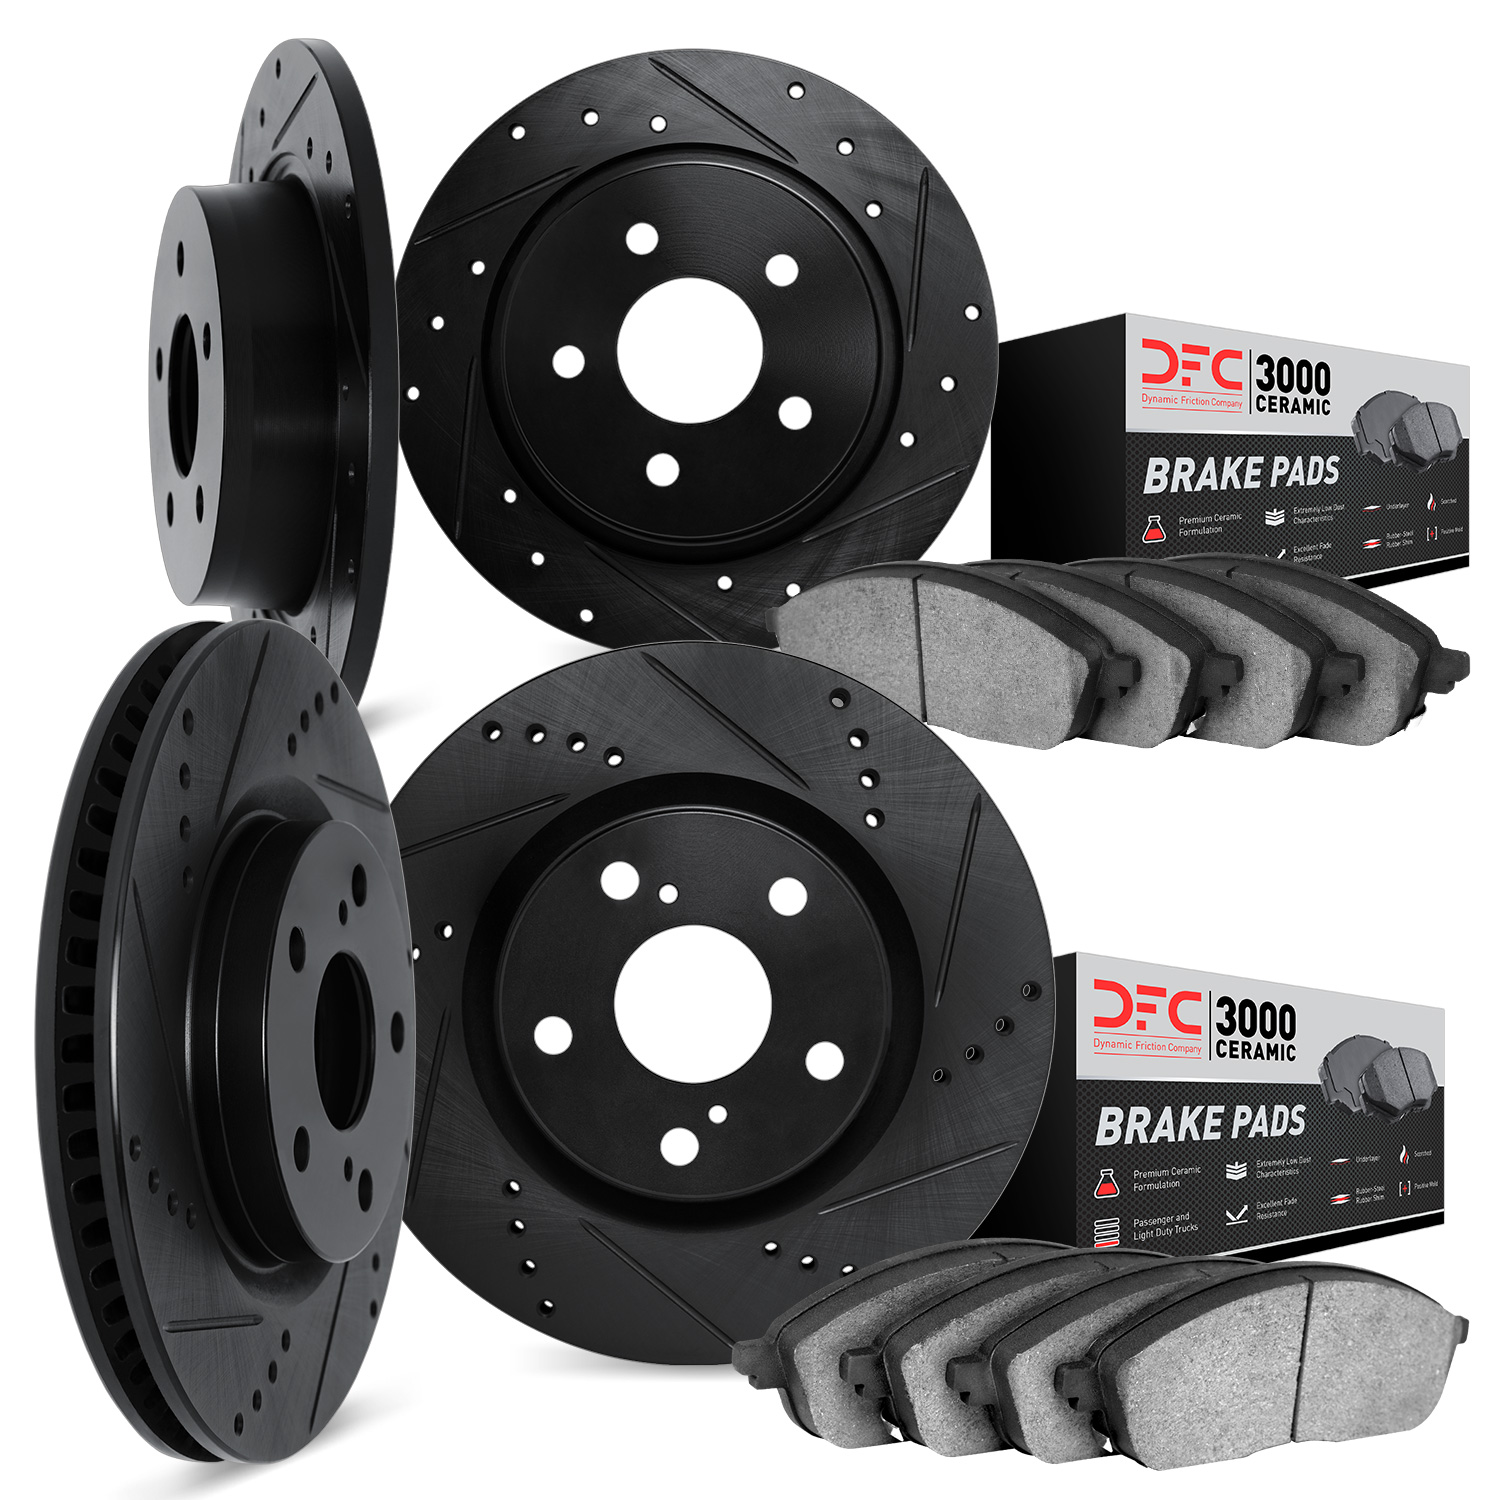 8304-13043 Drilled/Slotted Brake Rotors with 3000-Series Ceramic Brake Pads Kit [Black], 2011-2015 Subaru, Position: Front and R